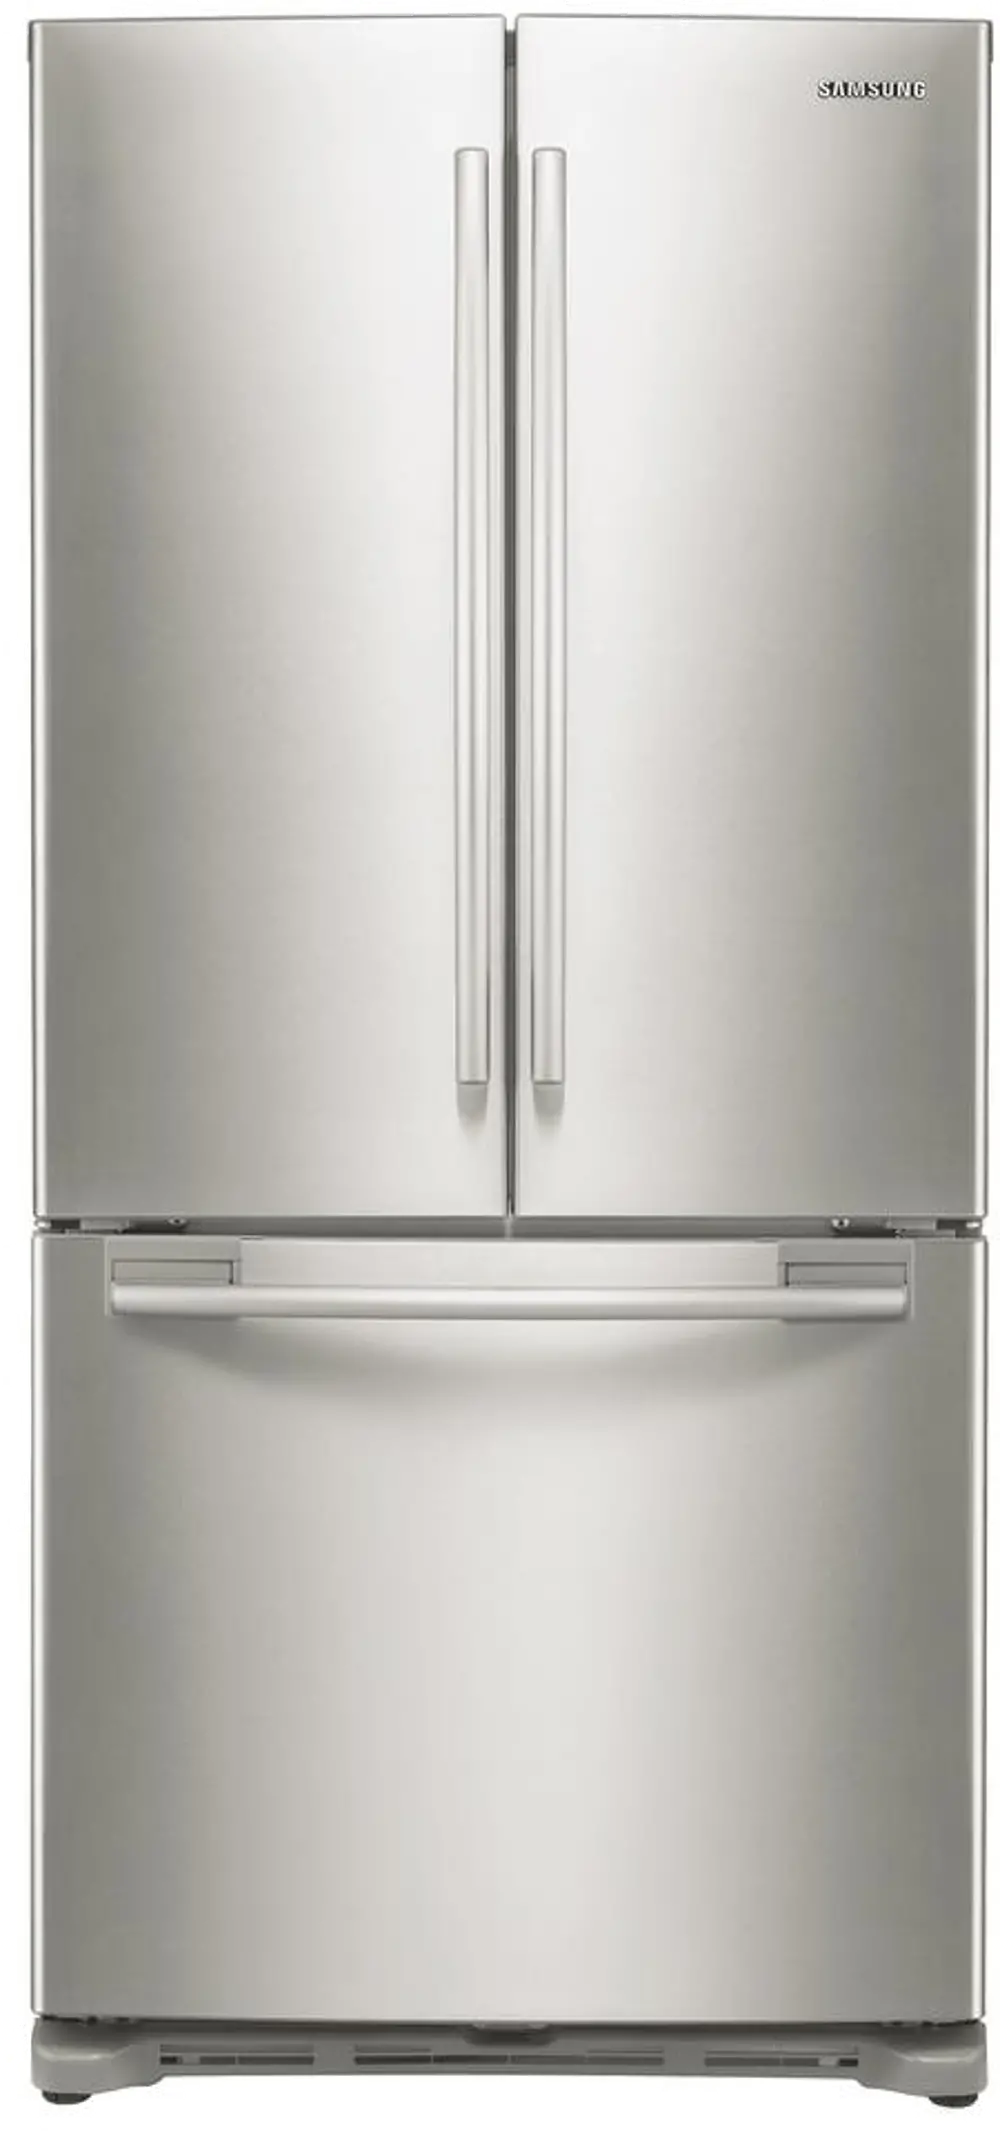 RF18HFENBSR Samsung Counter Depth French Door Refrigerator - 17.5 cu. ft., 33 Inch Stainless Steel-1